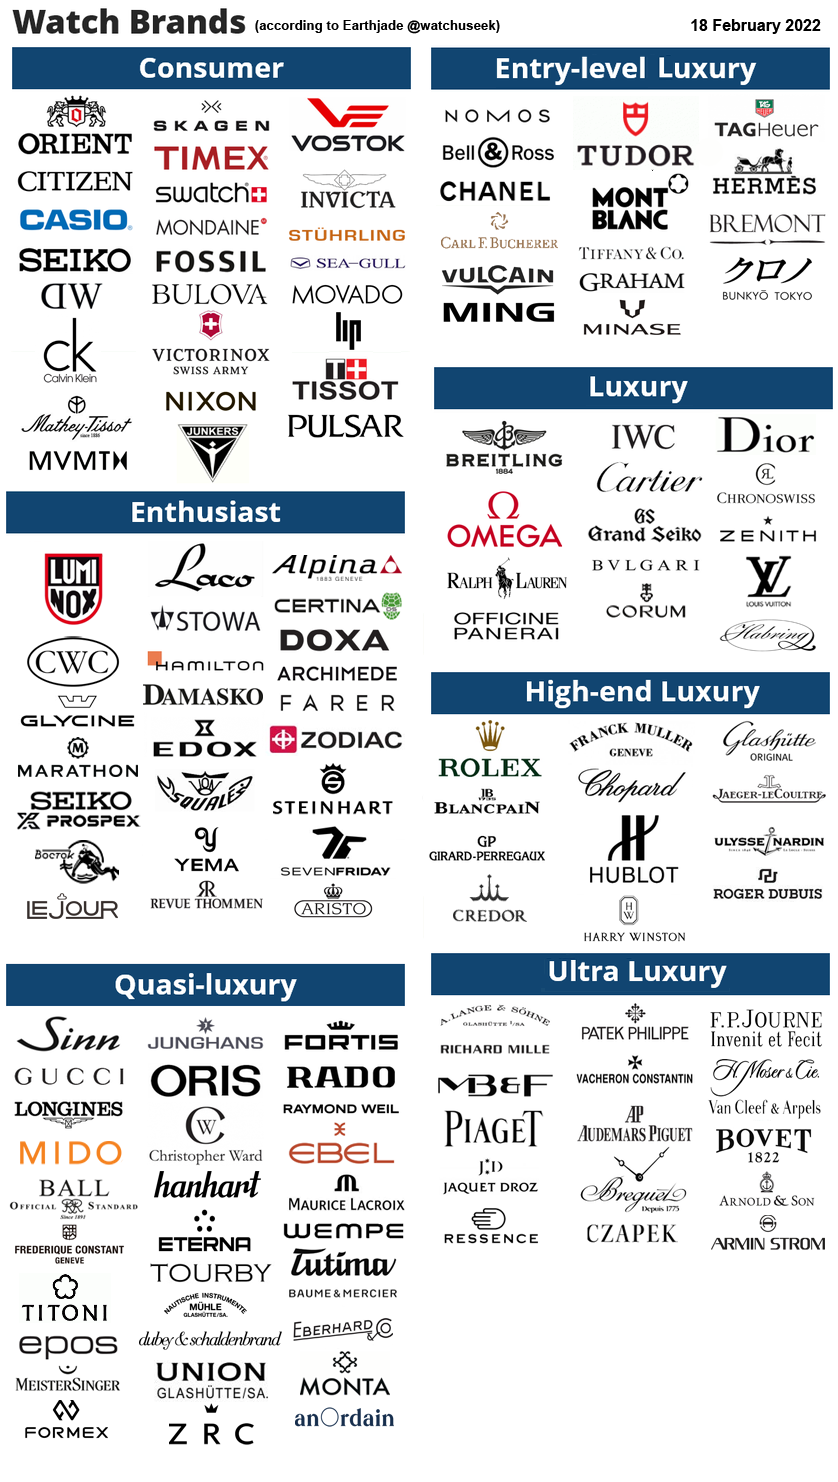 Here's the hierarchy of luxury brands around the world